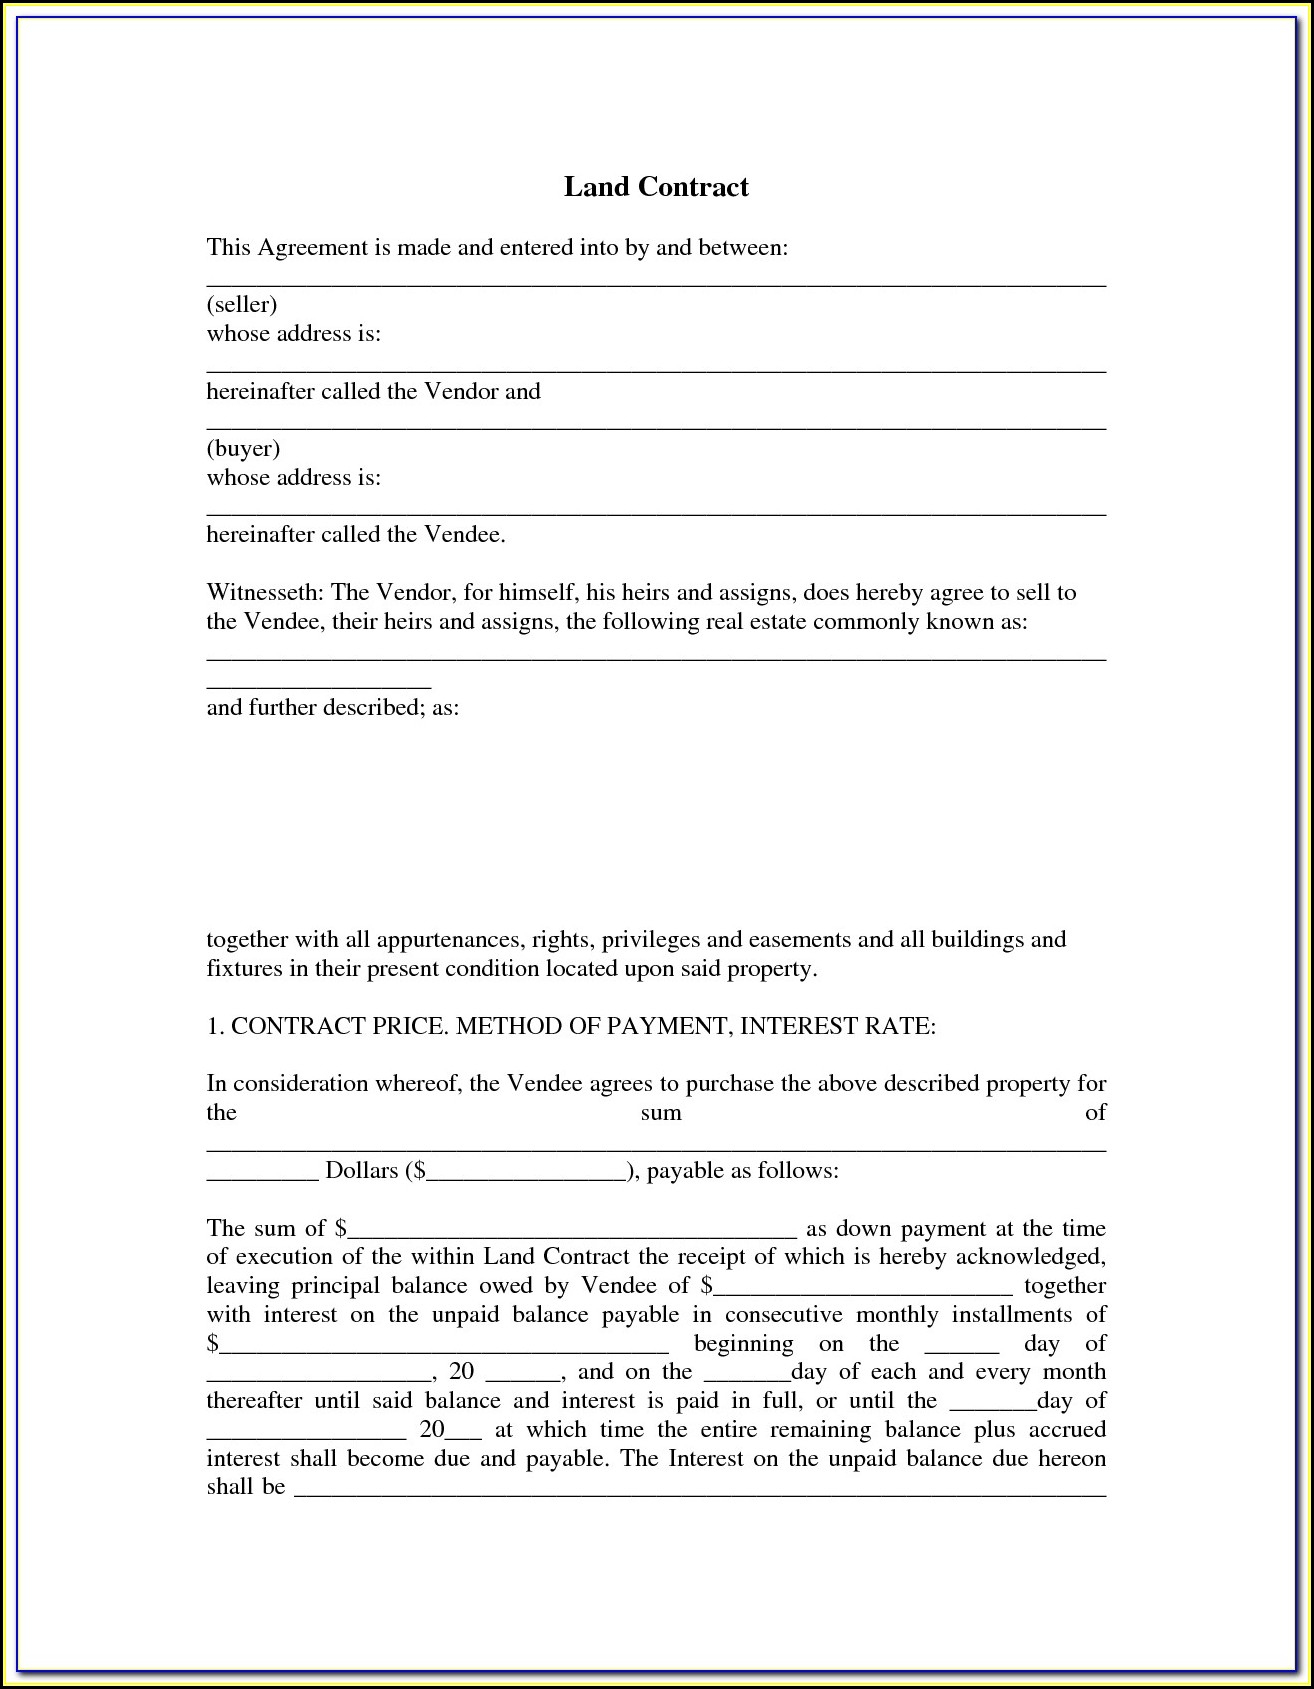 Free Printable Land Contract Forms Indiana - Form : Resume Examples - Free Printable Land Contract Forms